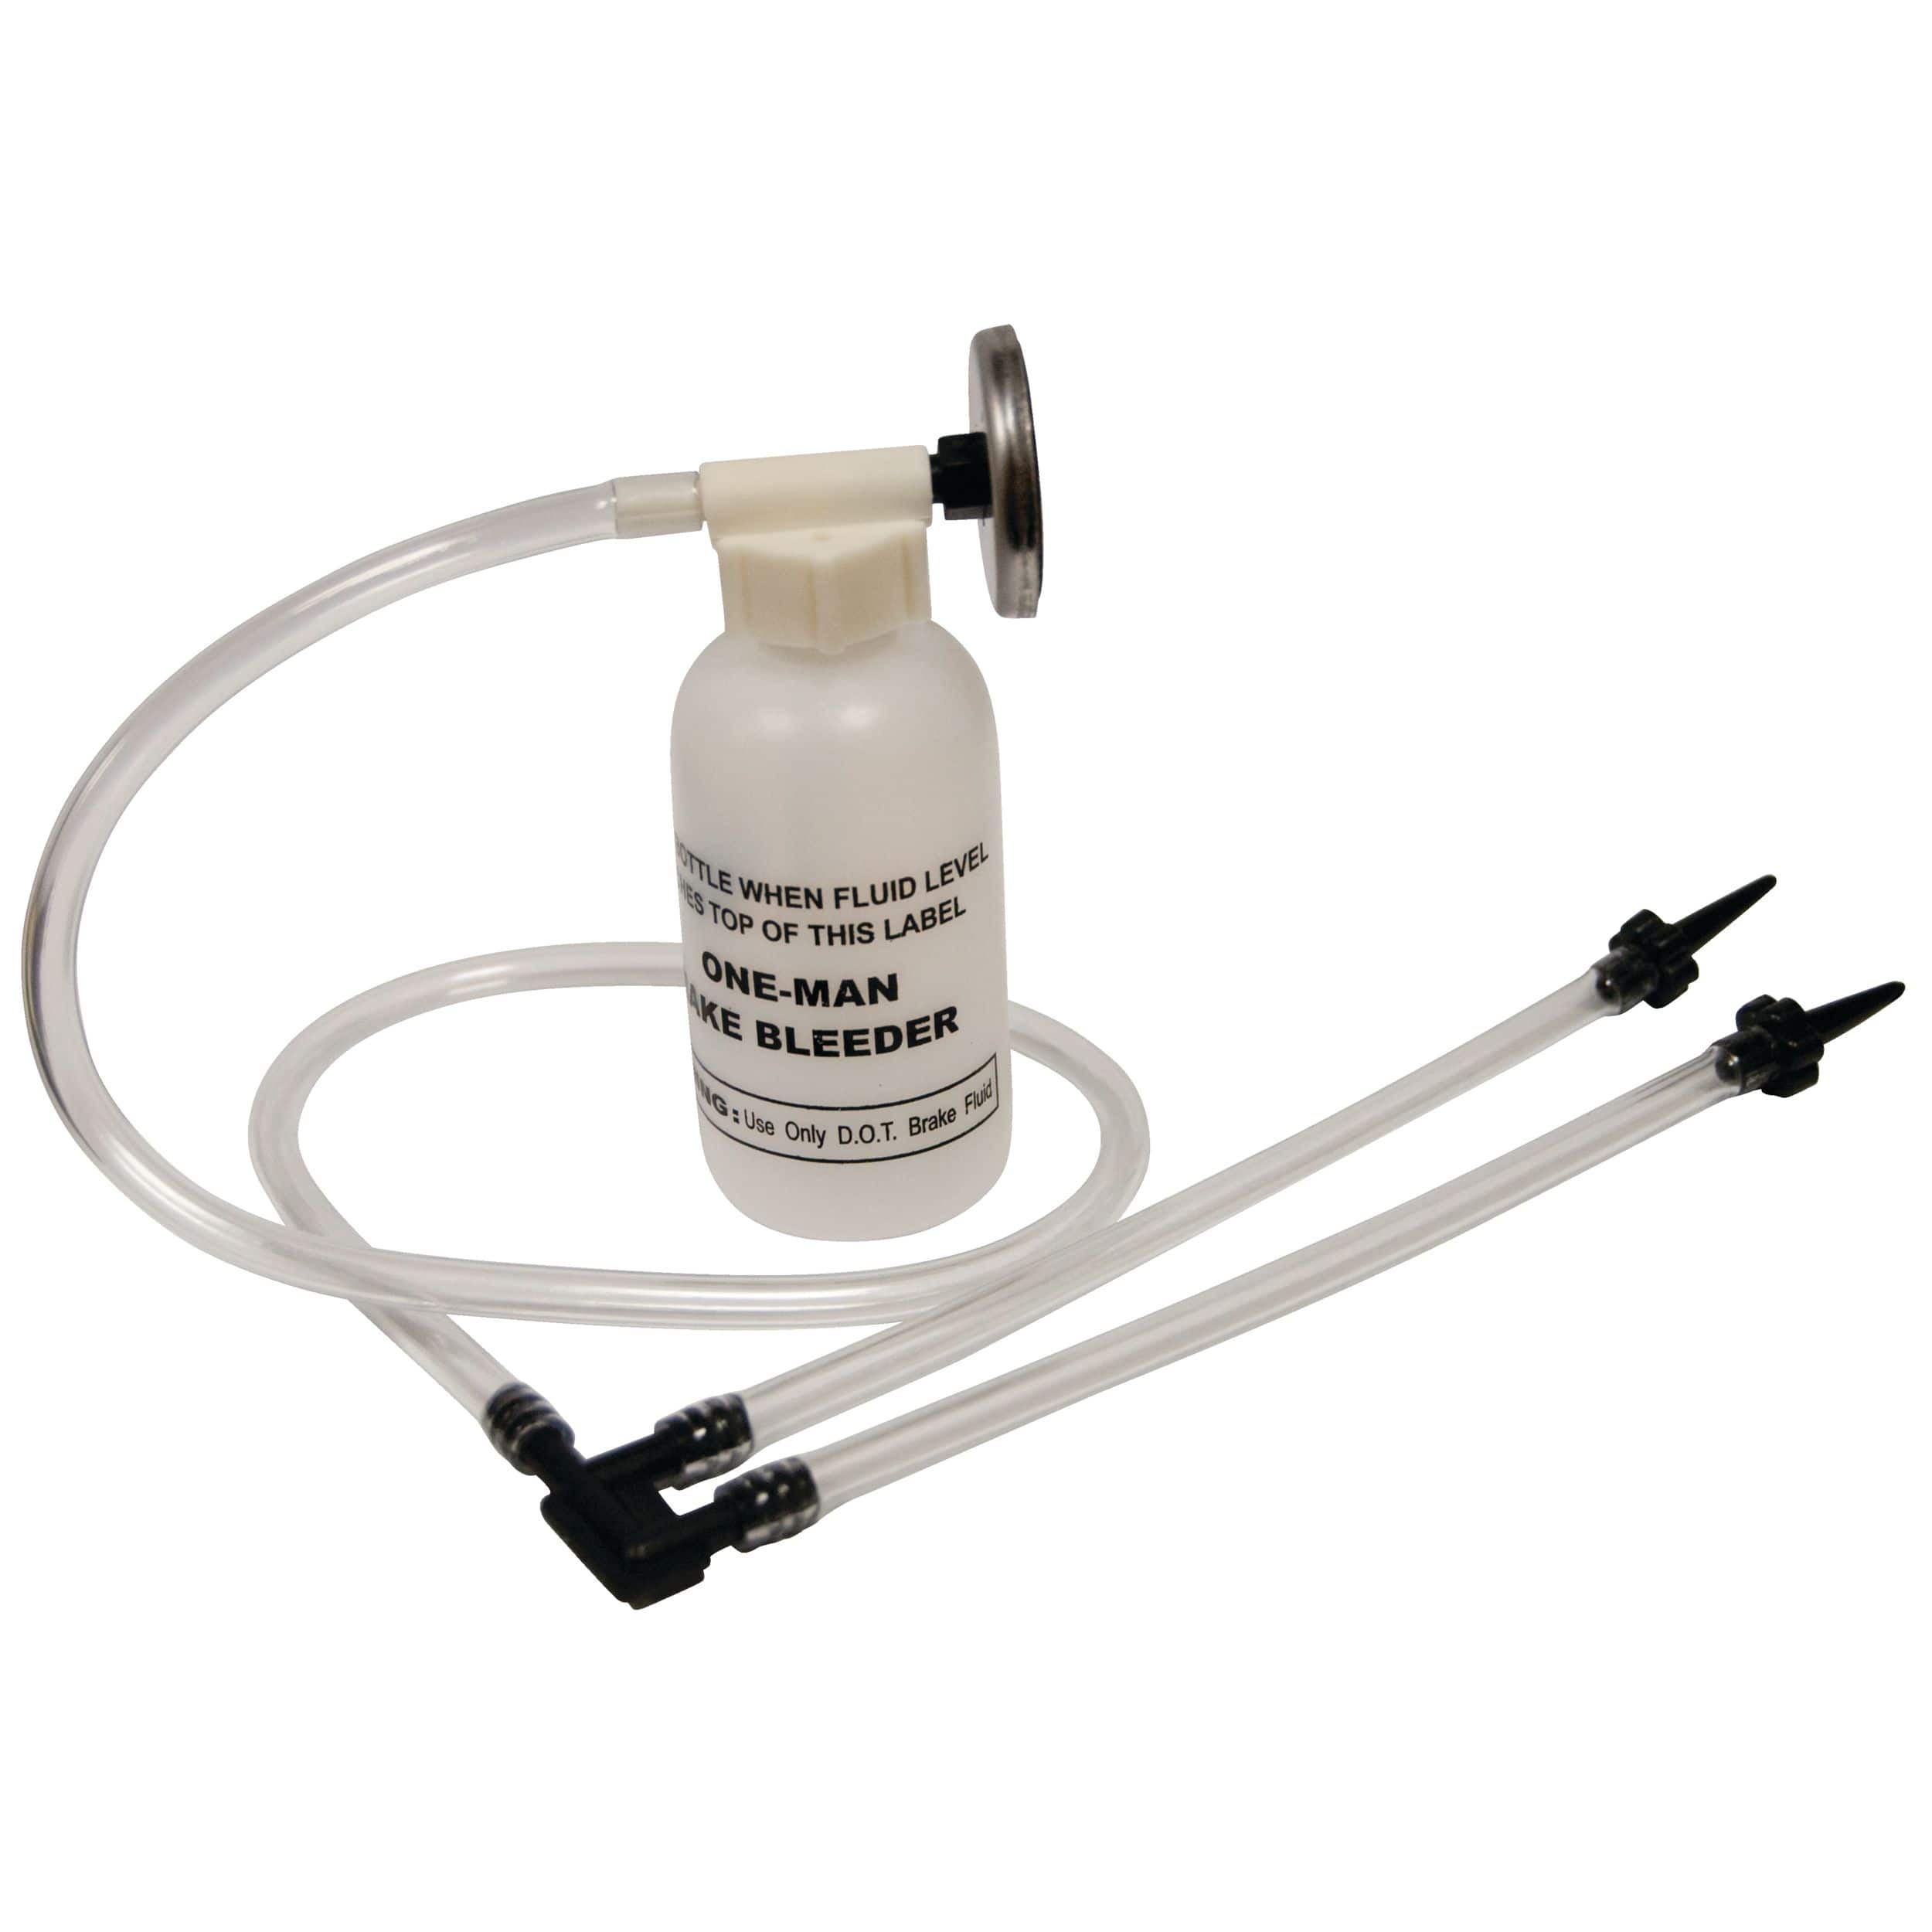 OEMTOOLS® Brake Bleeder Kit for use with calipers, wheel cylinders